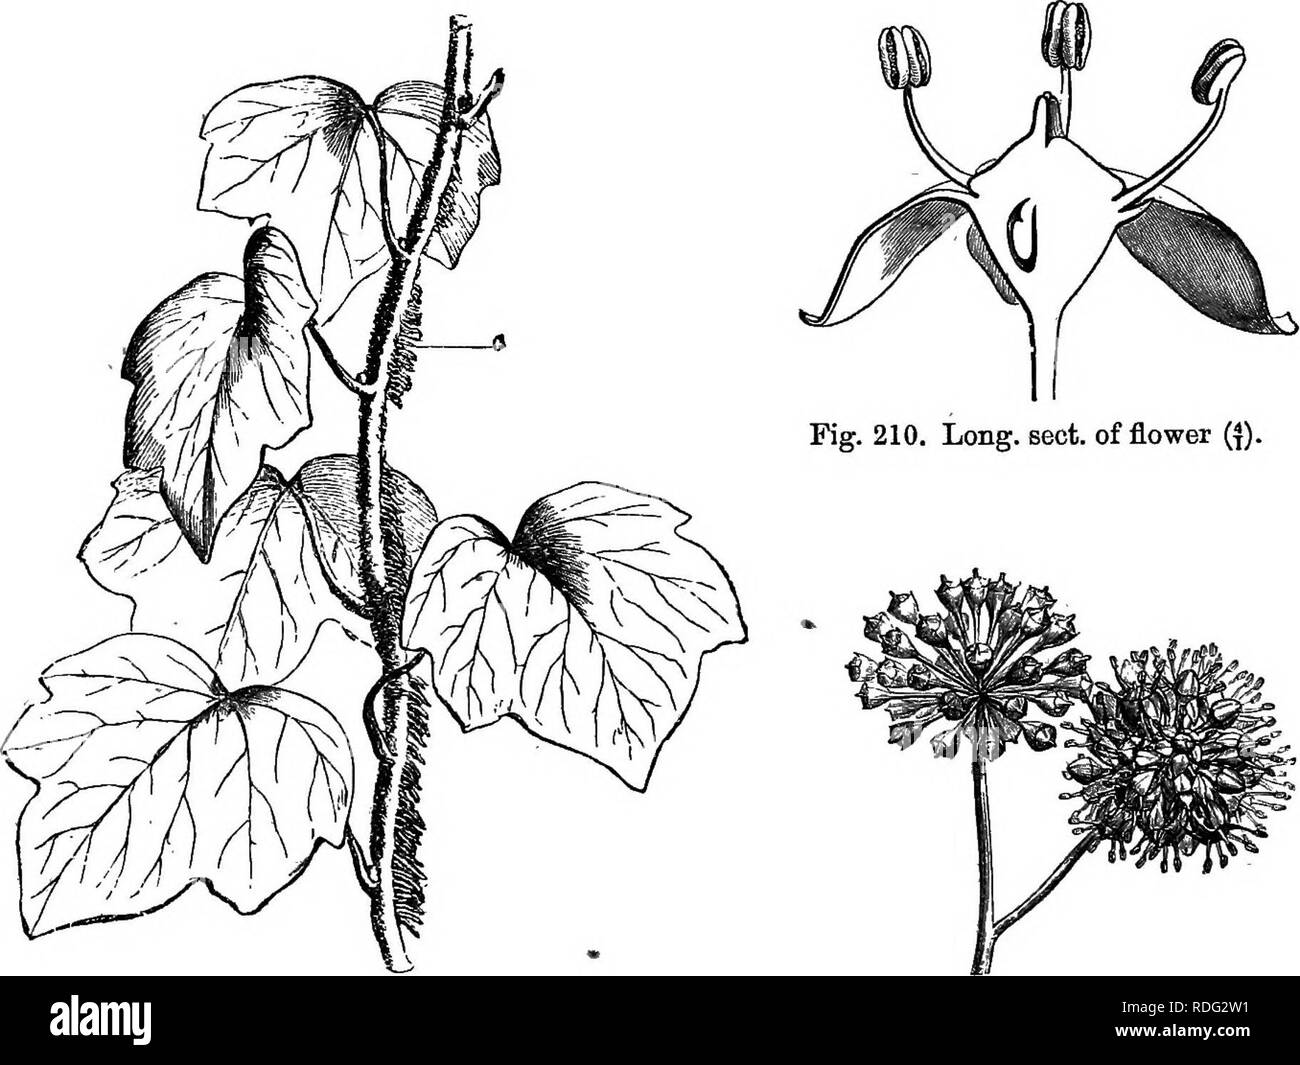 . The natural history of plants. Botany. 166 NATURAL HISTORY OF PLANTS. hooks or rootlets and has alternate-distichous lobed leaves. On those of its branches which are free and whose leaves, quincuncially Bedera Selix.. Fig. 208. Branch with hooka. Fig. 209. Inflorescences. alternate, are entire, the inflorescences are terminal and in clusters of umbellules, terminated by a. more aged umbellule. The pedicels, articulate at the base, are mderaSehx. inserted in the,axil of small bracts. To this genus has been referred as a section, H. australiana, proposed also as a distinct genus under the name Stock Photo